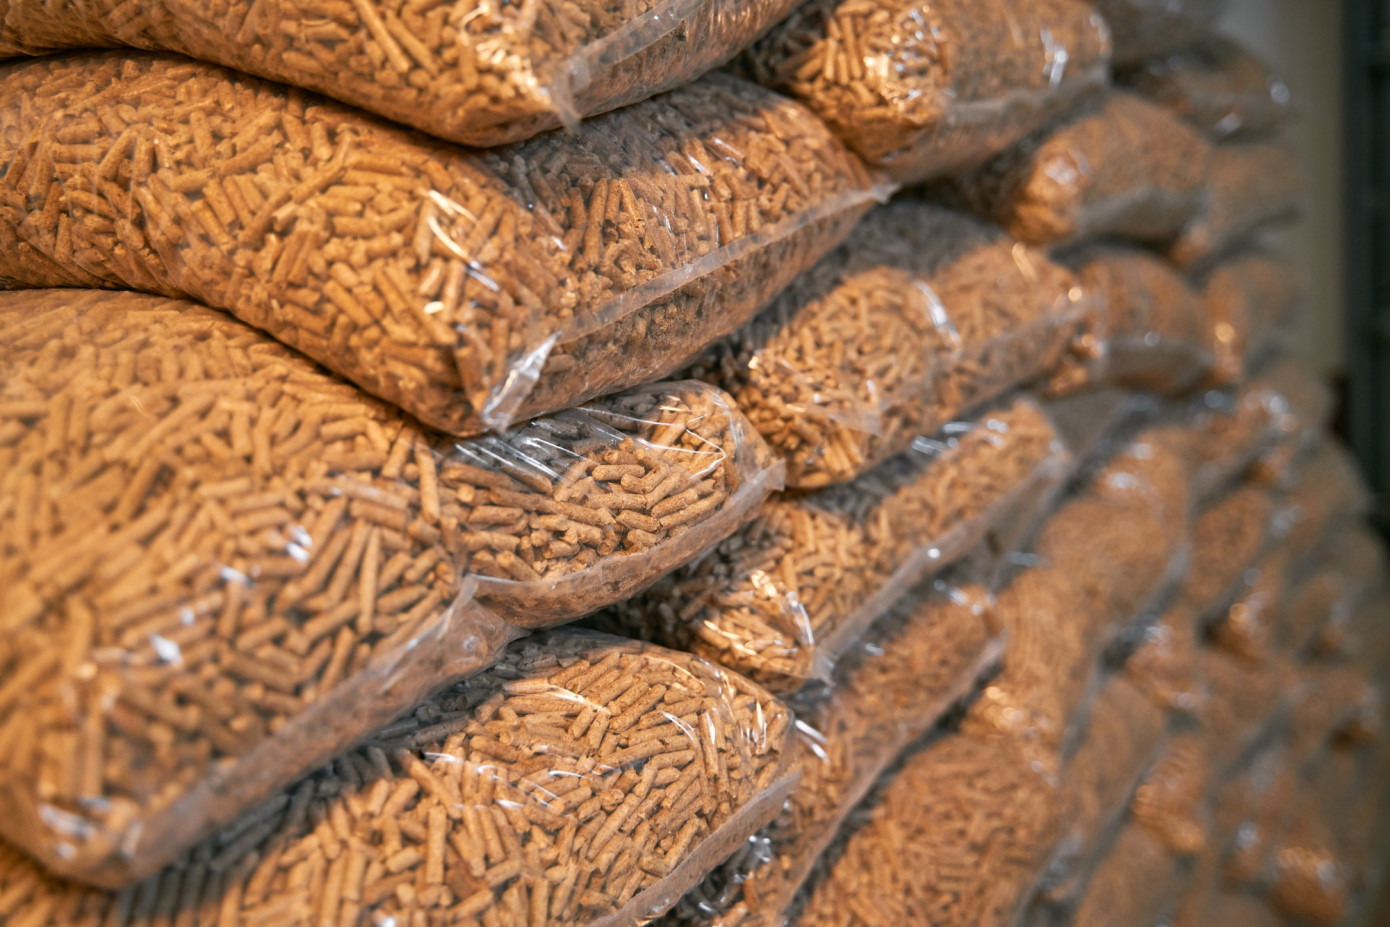 Russia cannot compensate for stop of exporting wood pellets to Europe with deliveries to other markets